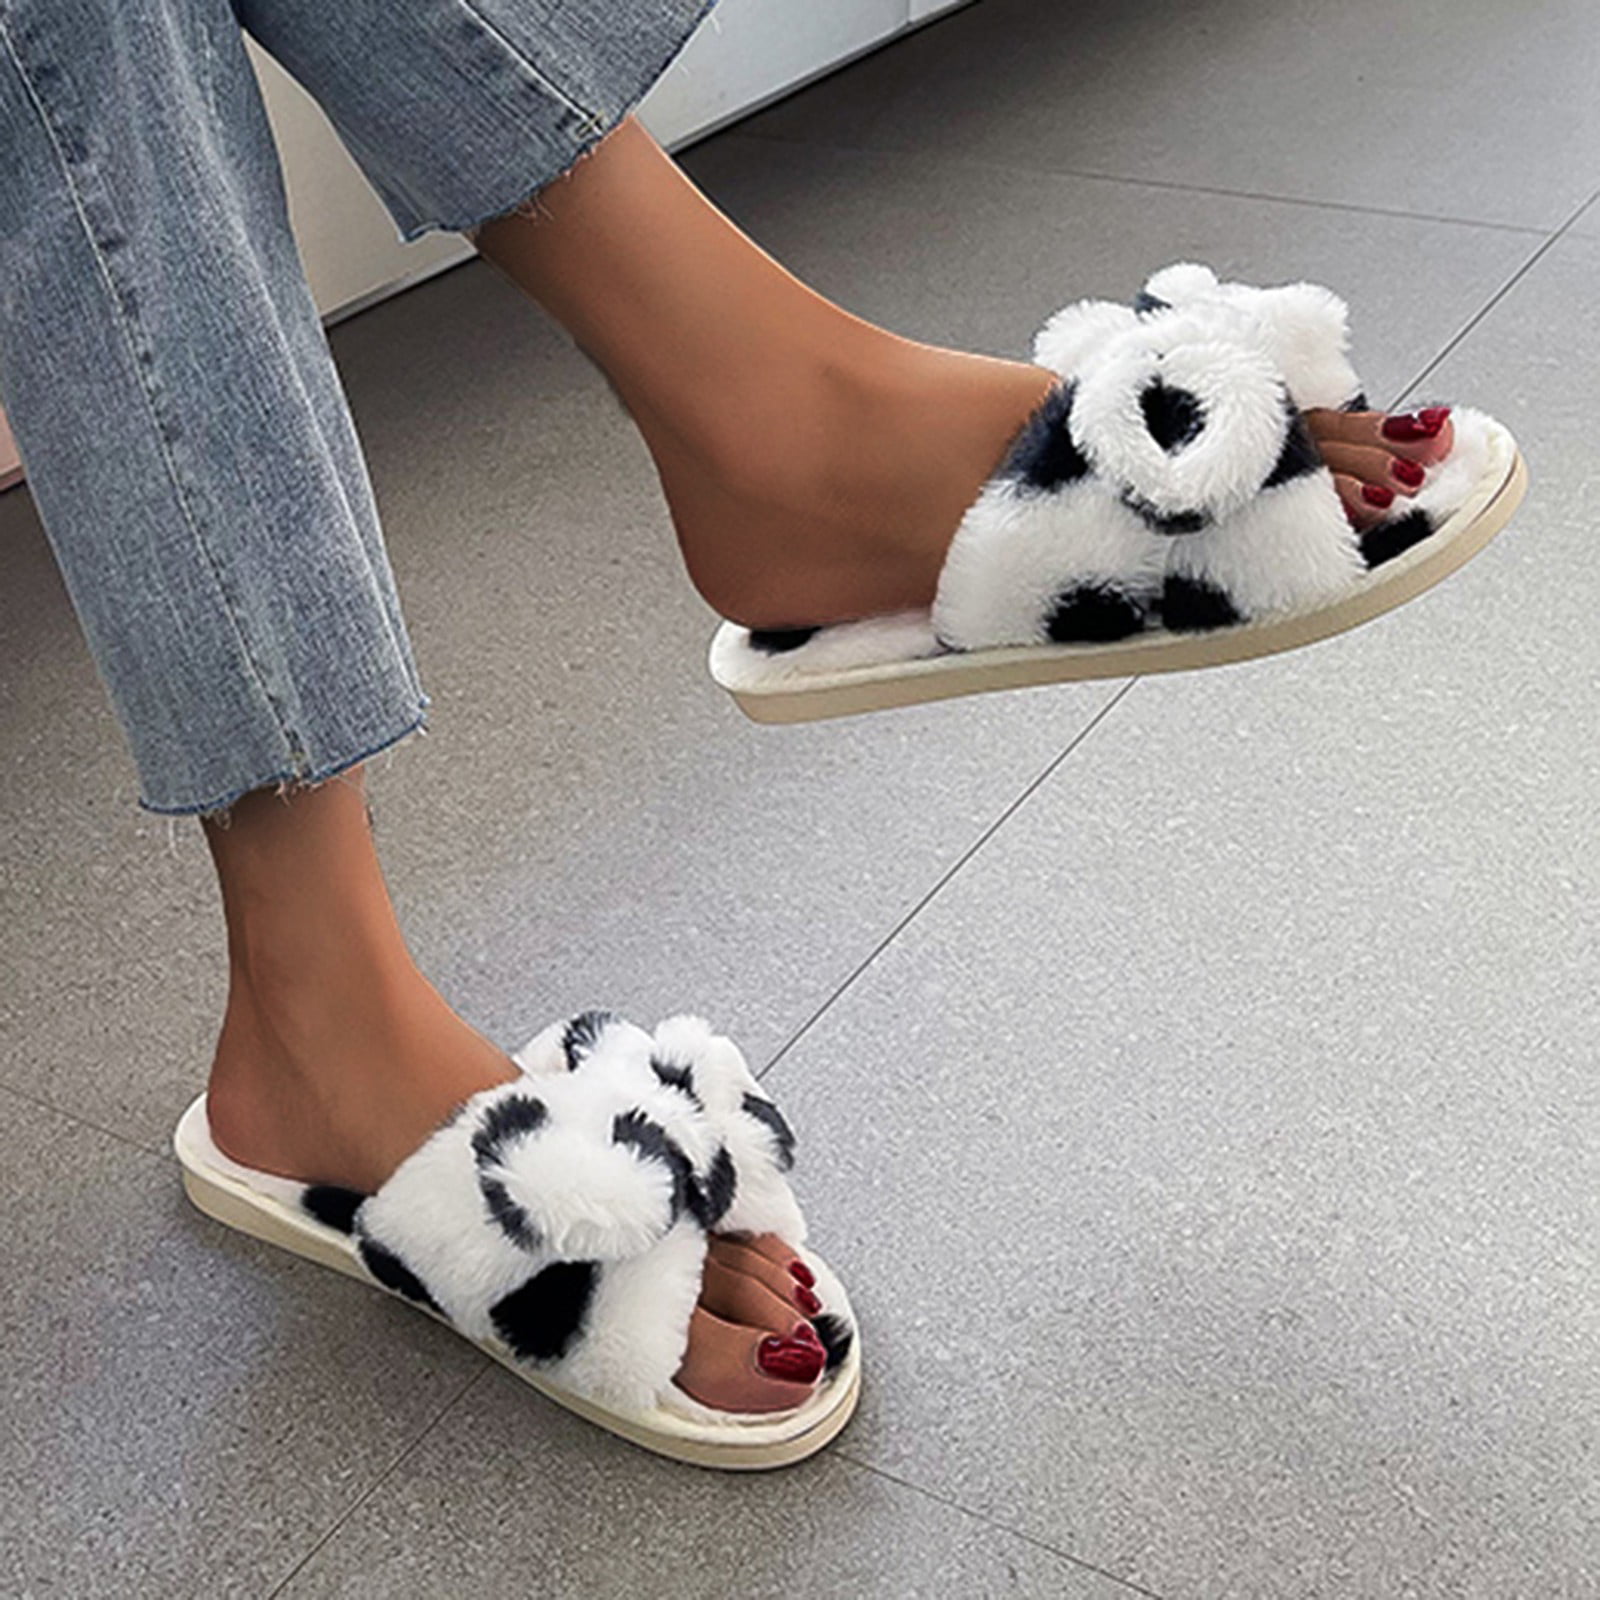 Soft Plush Slippers Women Women's Shoes Breathable Color Slippers Fashion Outdoor Women Slippers Black 7.5 - Walmart.com